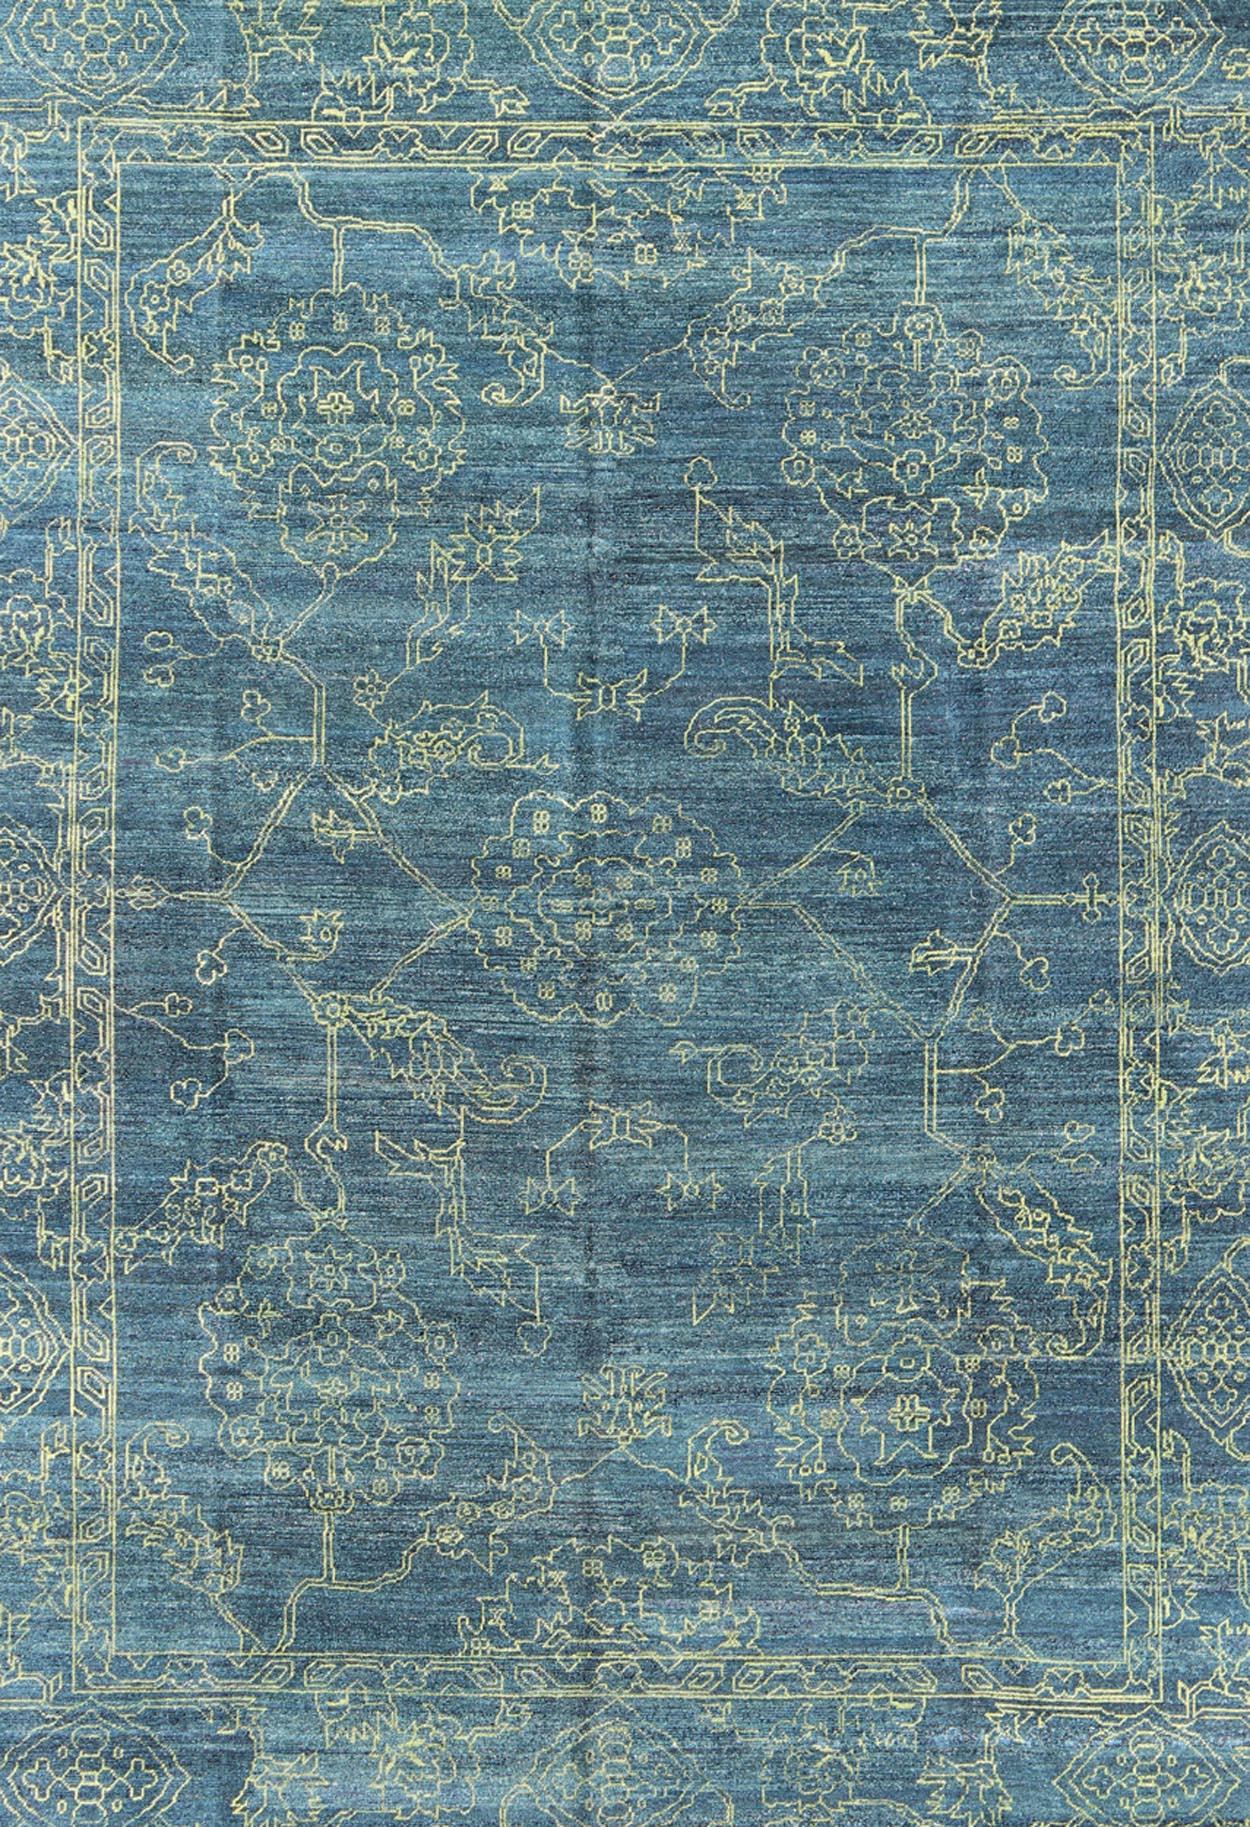 Fine Modern Rug with Transitional Design in Teal Blue and Lime Green In Excellent Condition For Sale In Atlanta, GA